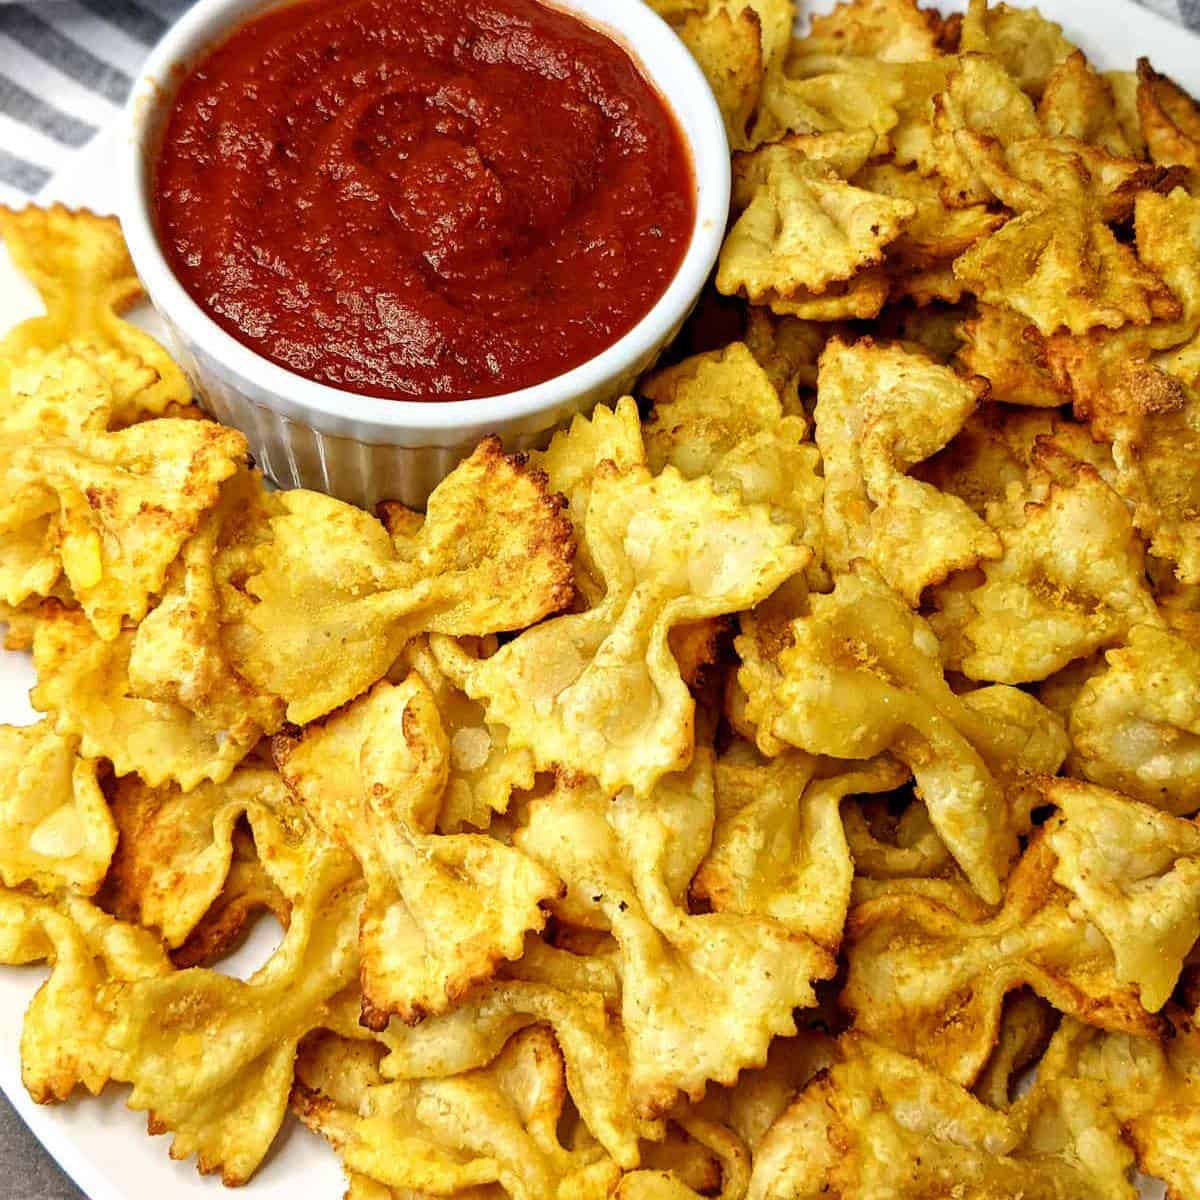 bowtie pasta turned into chips with marinara dip.